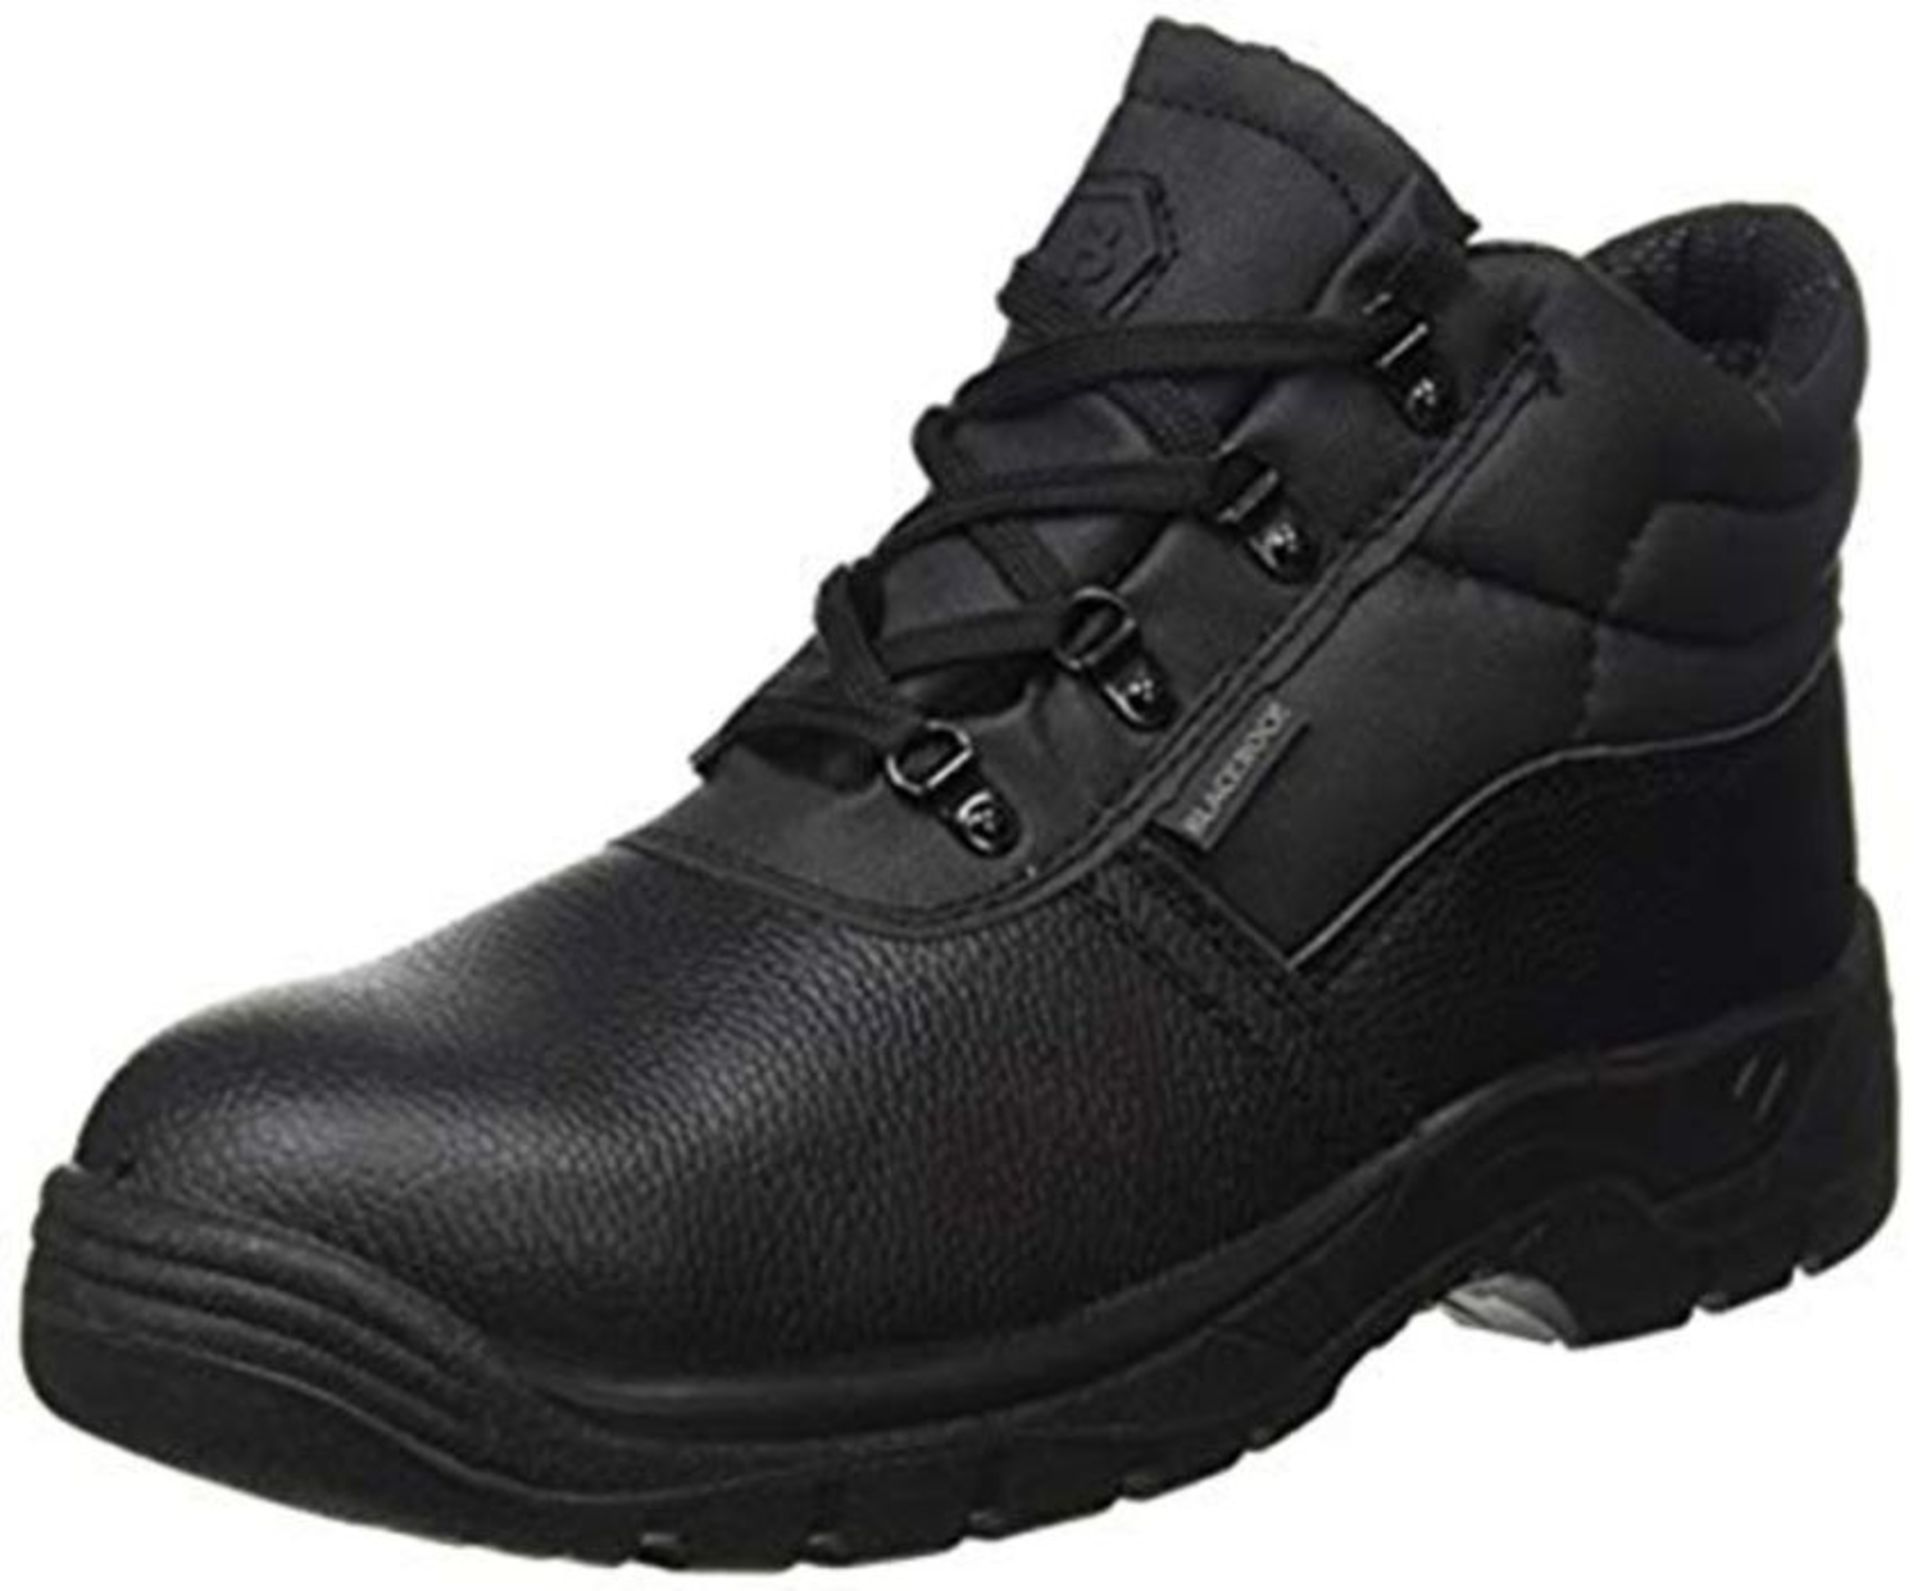 Blackrock Black Leather Work Safety Chukka Boots With Steel Toe Caps And Midsole (UK8